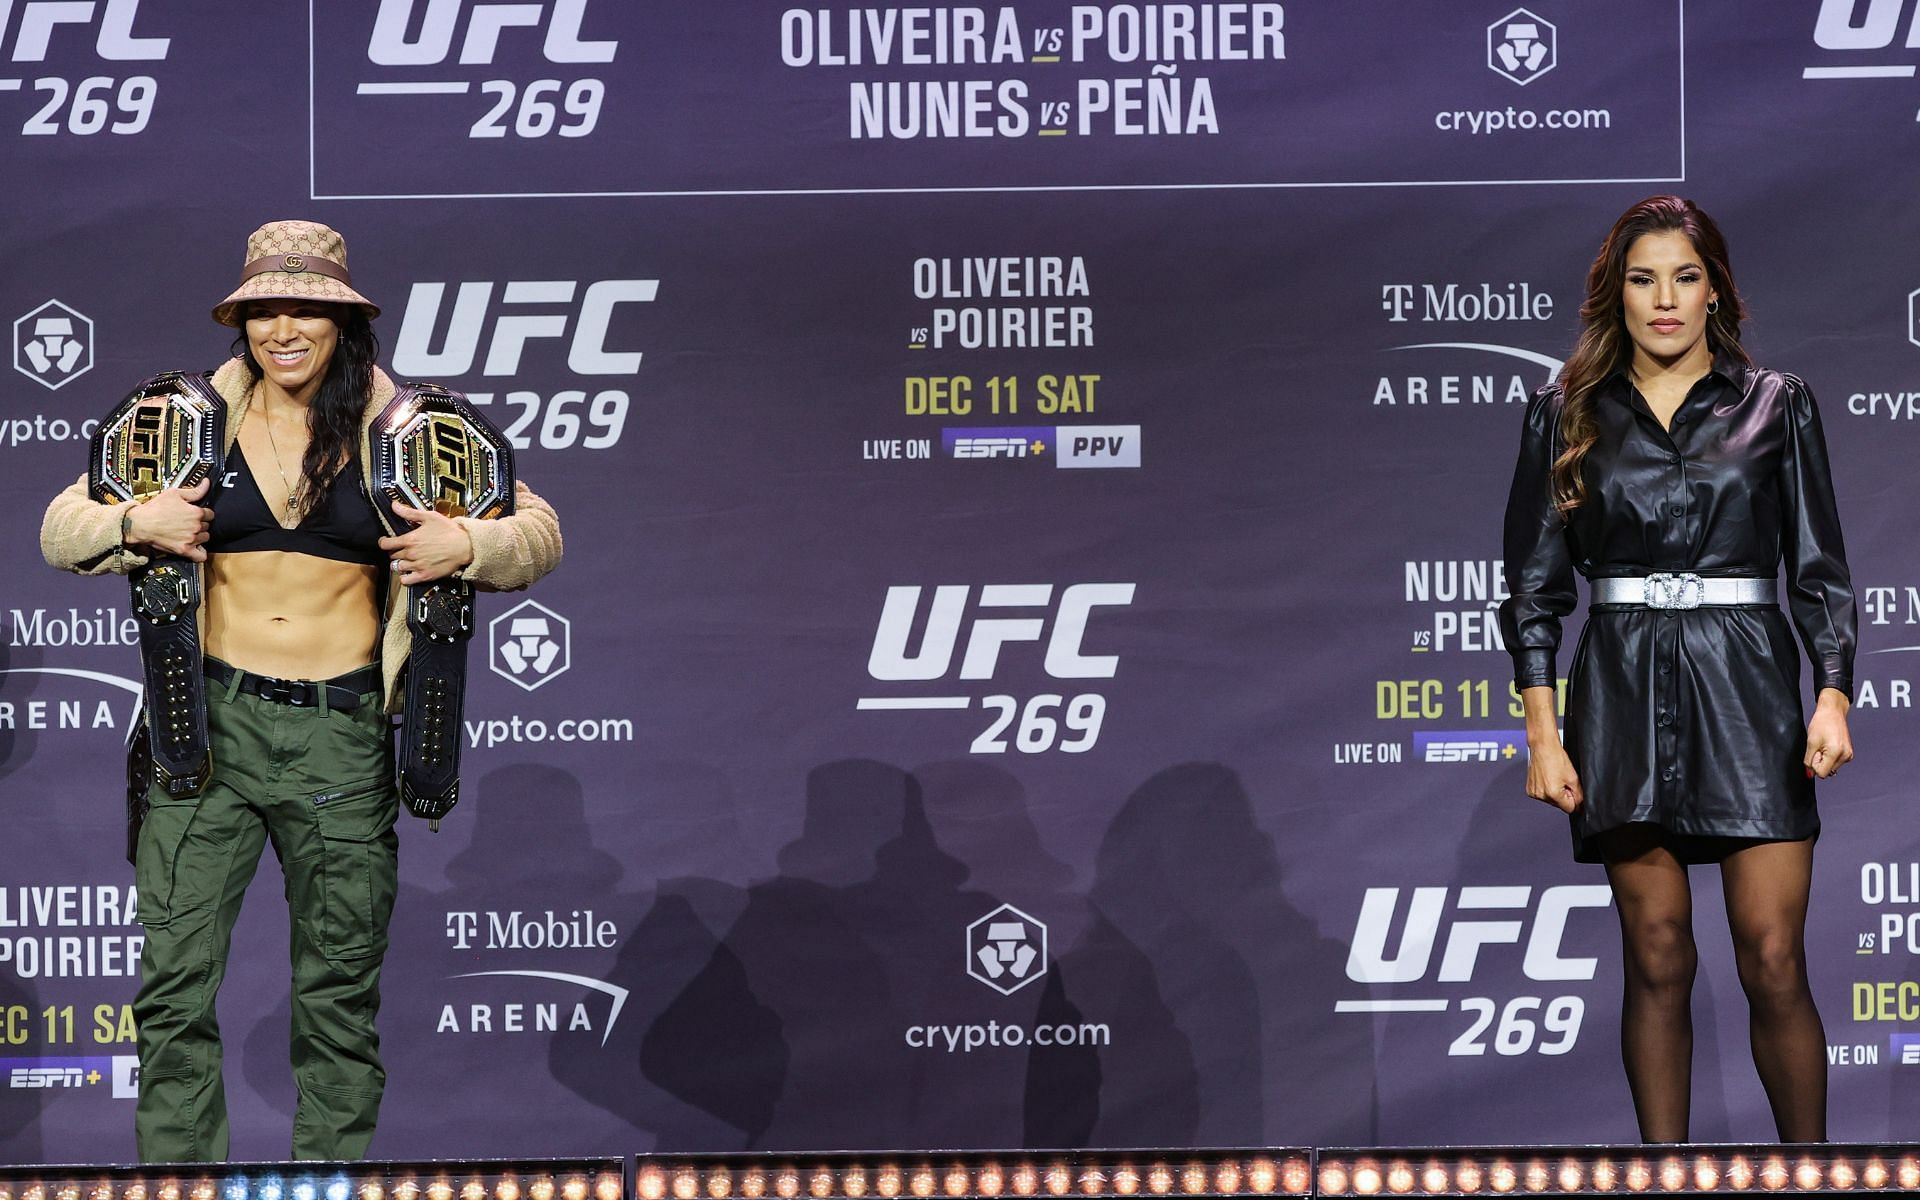 Amanda Nunes (left) and Julianna Pena (right) pose for the media after the UFC 269 press conference